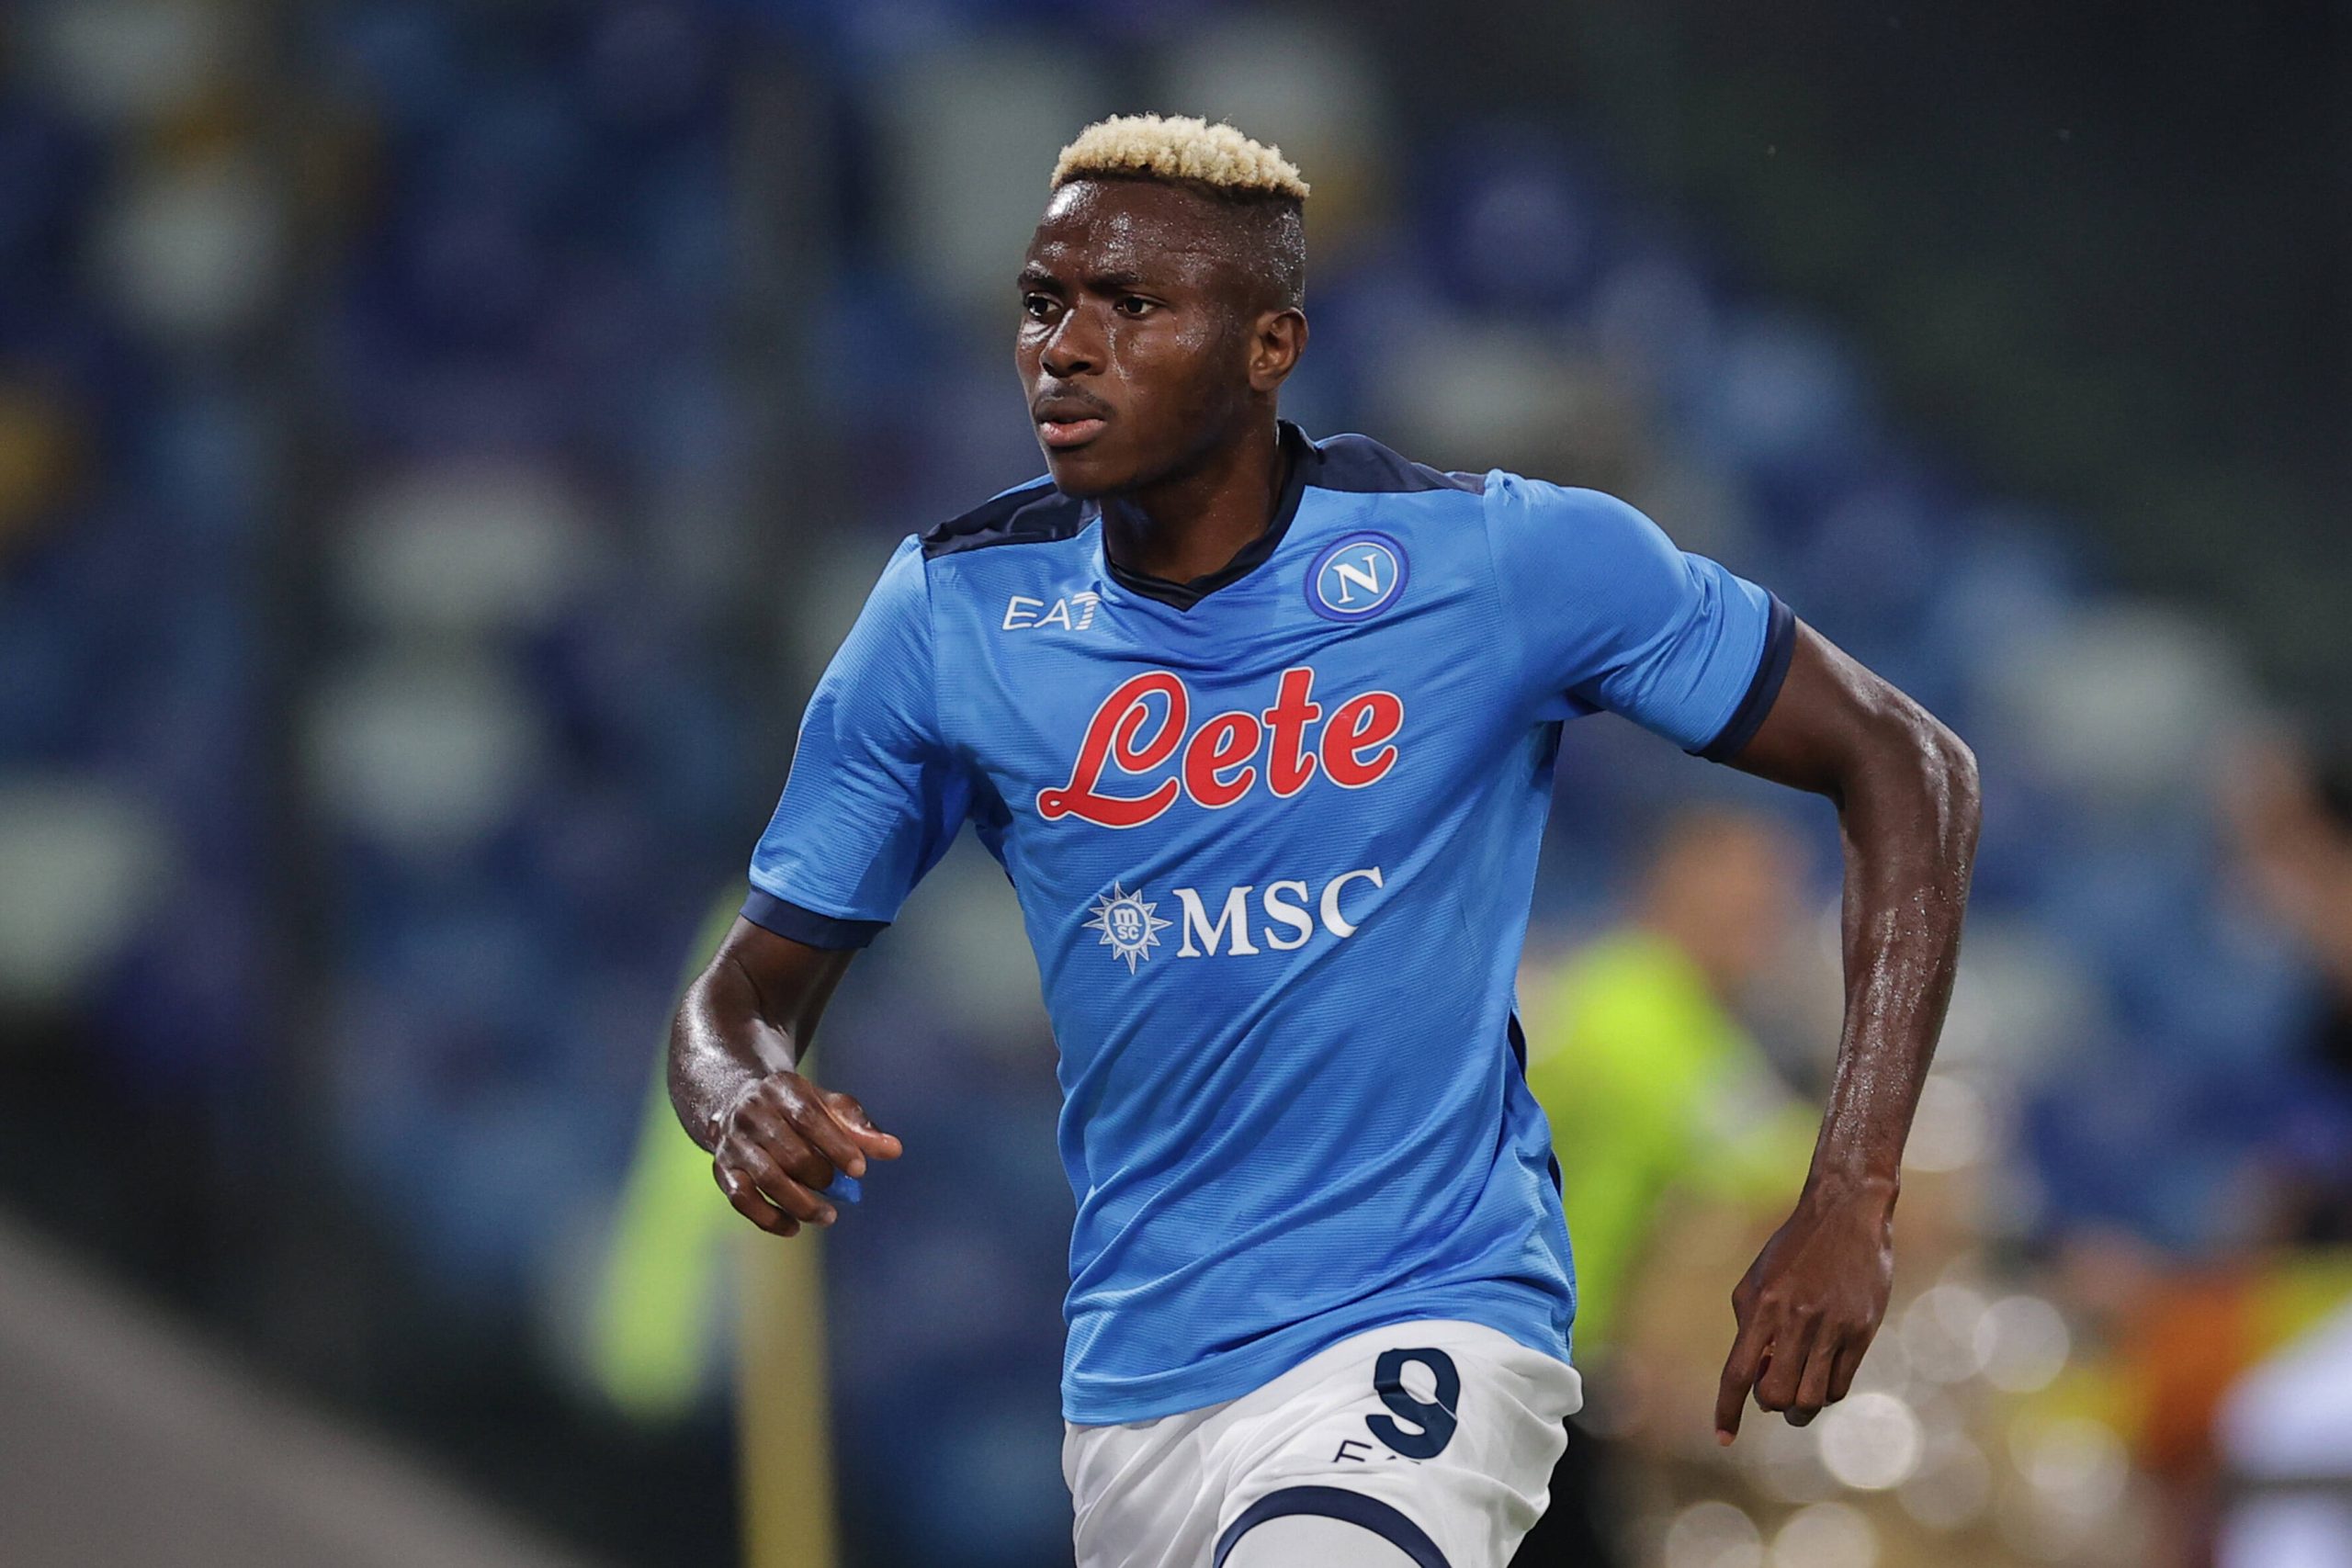 Napoli star Victor Osimhen is keen to make Premier League switch amidst Chelsea interest.